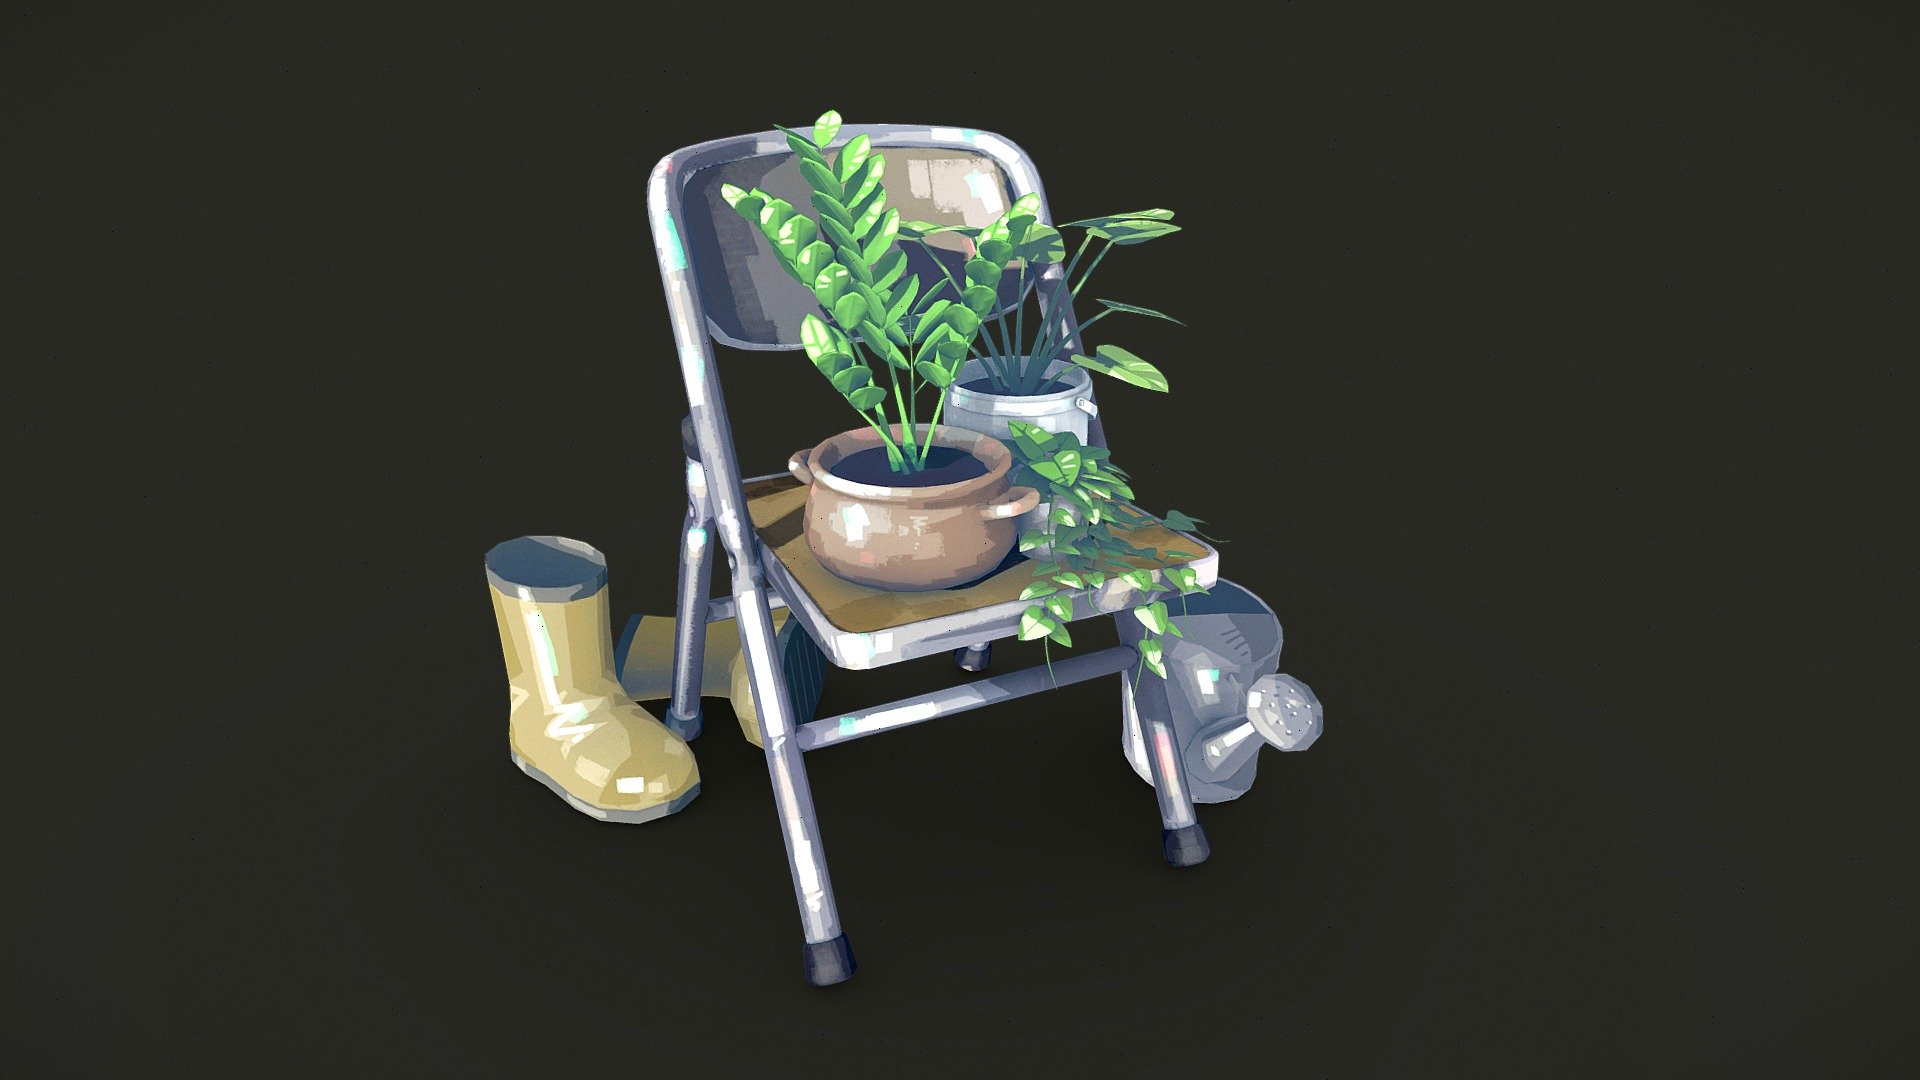 Inspired by my mothers garden, and her dedication with plants, this is also my first attempt at stylizing plants.

Using Blender, Substance 3D Painter 3d model